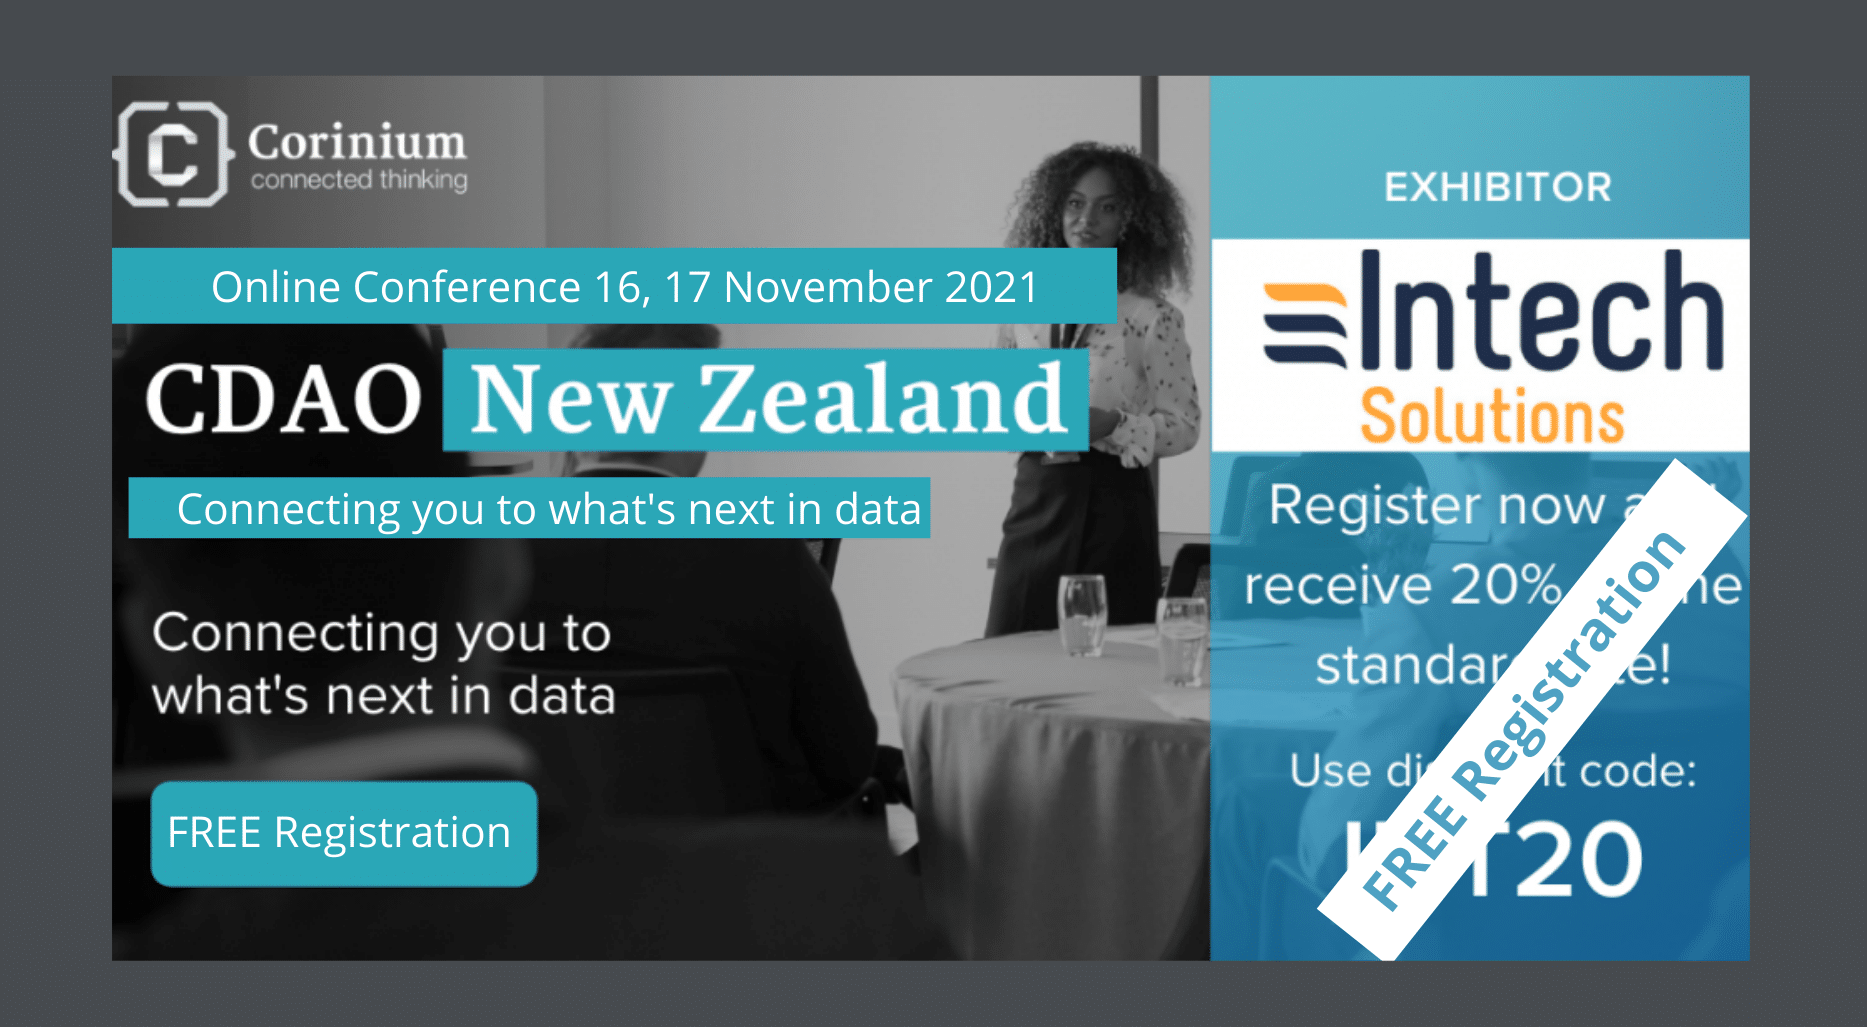 CDAO (Chief Data & Analytics Officer) New Zealand conference.